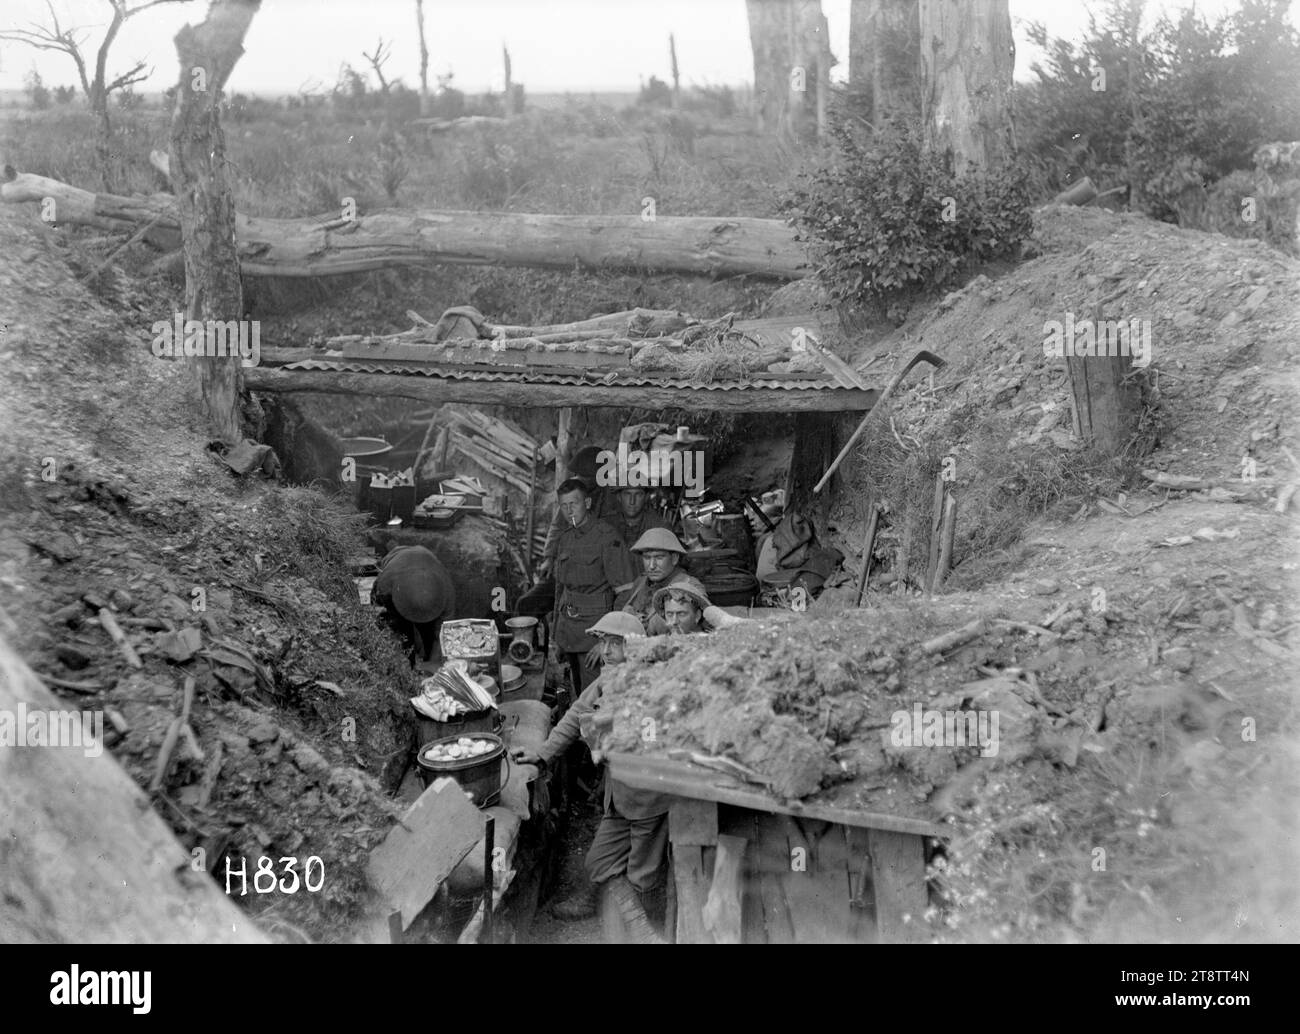 Preparing a meal in the trenches near Gommecourt, World War I, A view looking down into a trench which temporarily houses the company cookhouse of the New Zealand Rifle Brigade, near the front during World War I. Helmeted soldiers prepare meals in very cramped conditions with only pieces of wood and corrugated iron above for protection. A large iron pot full of potatoes? and a meat grinder are visible in the foreground. Photograph taken near Gommecourt, France, 25 July 1918 Stock Photo